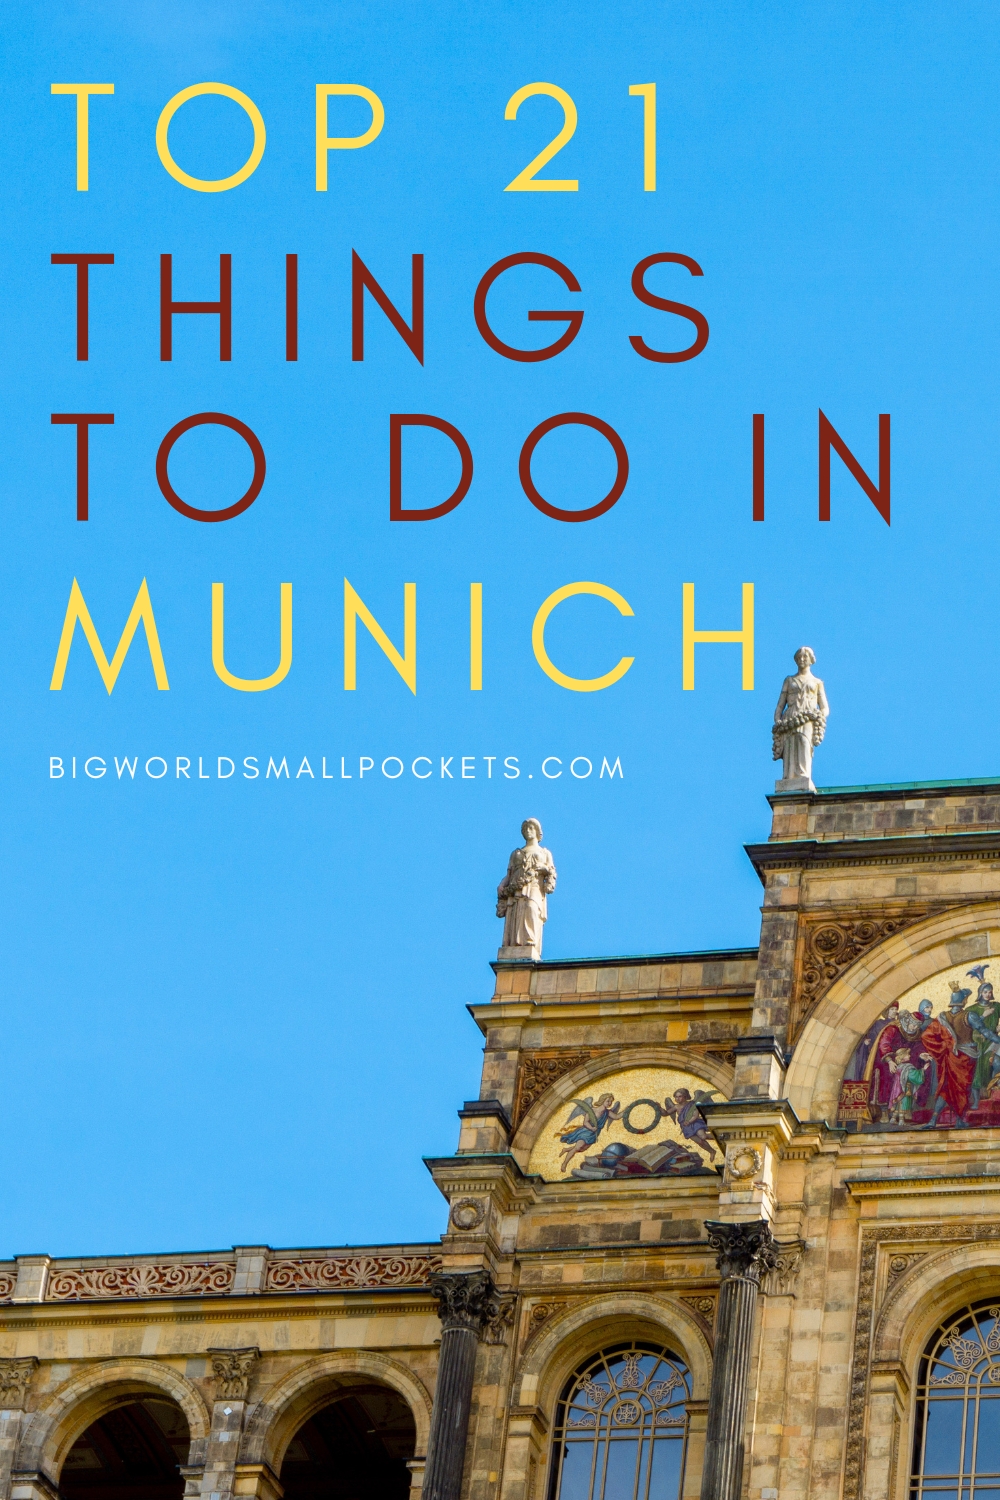 Top 21 Things to Do in Munich